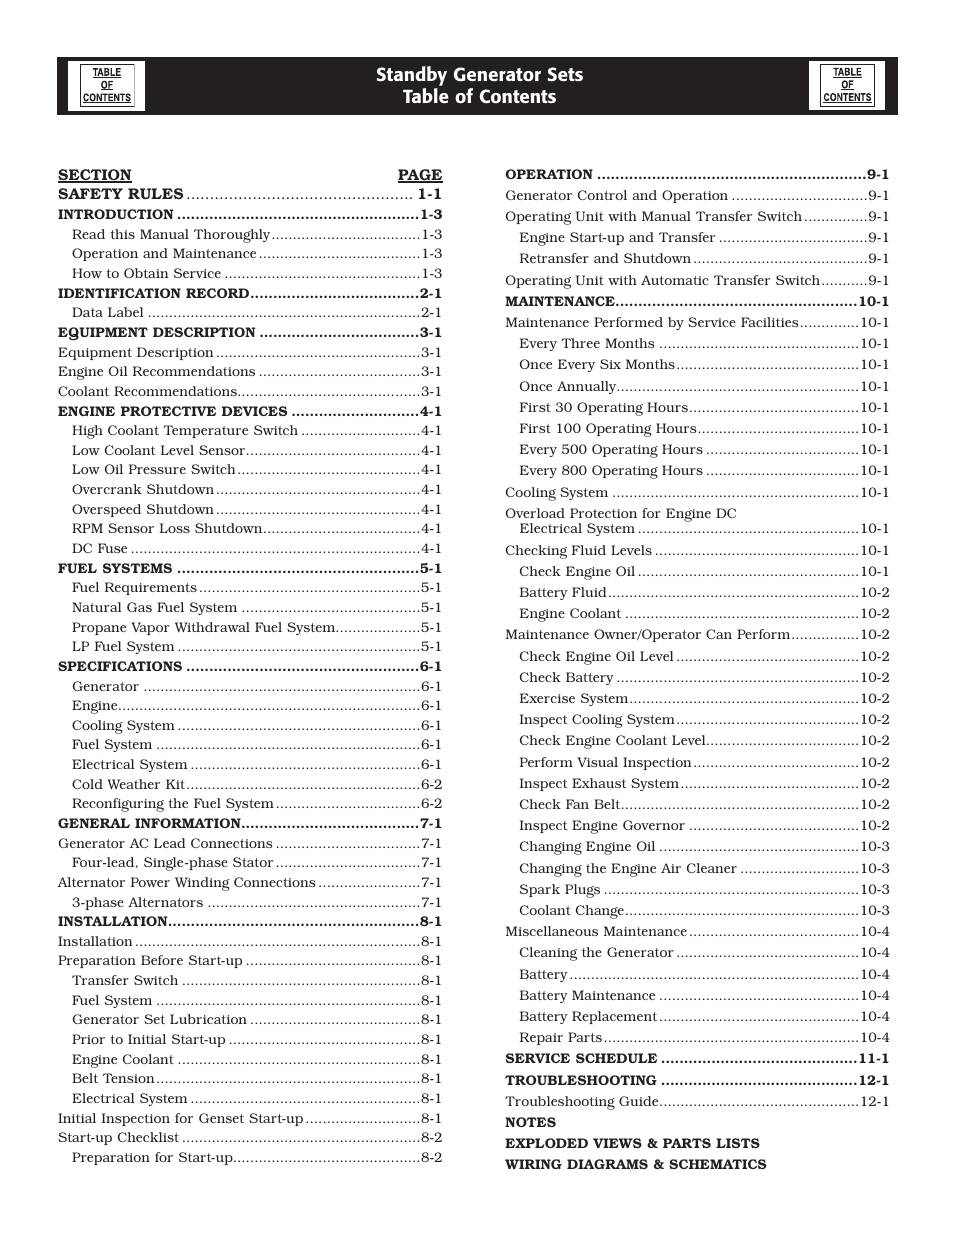 Standby generator sets table of contents | LG 30kW User Manual | Page 2 / 60